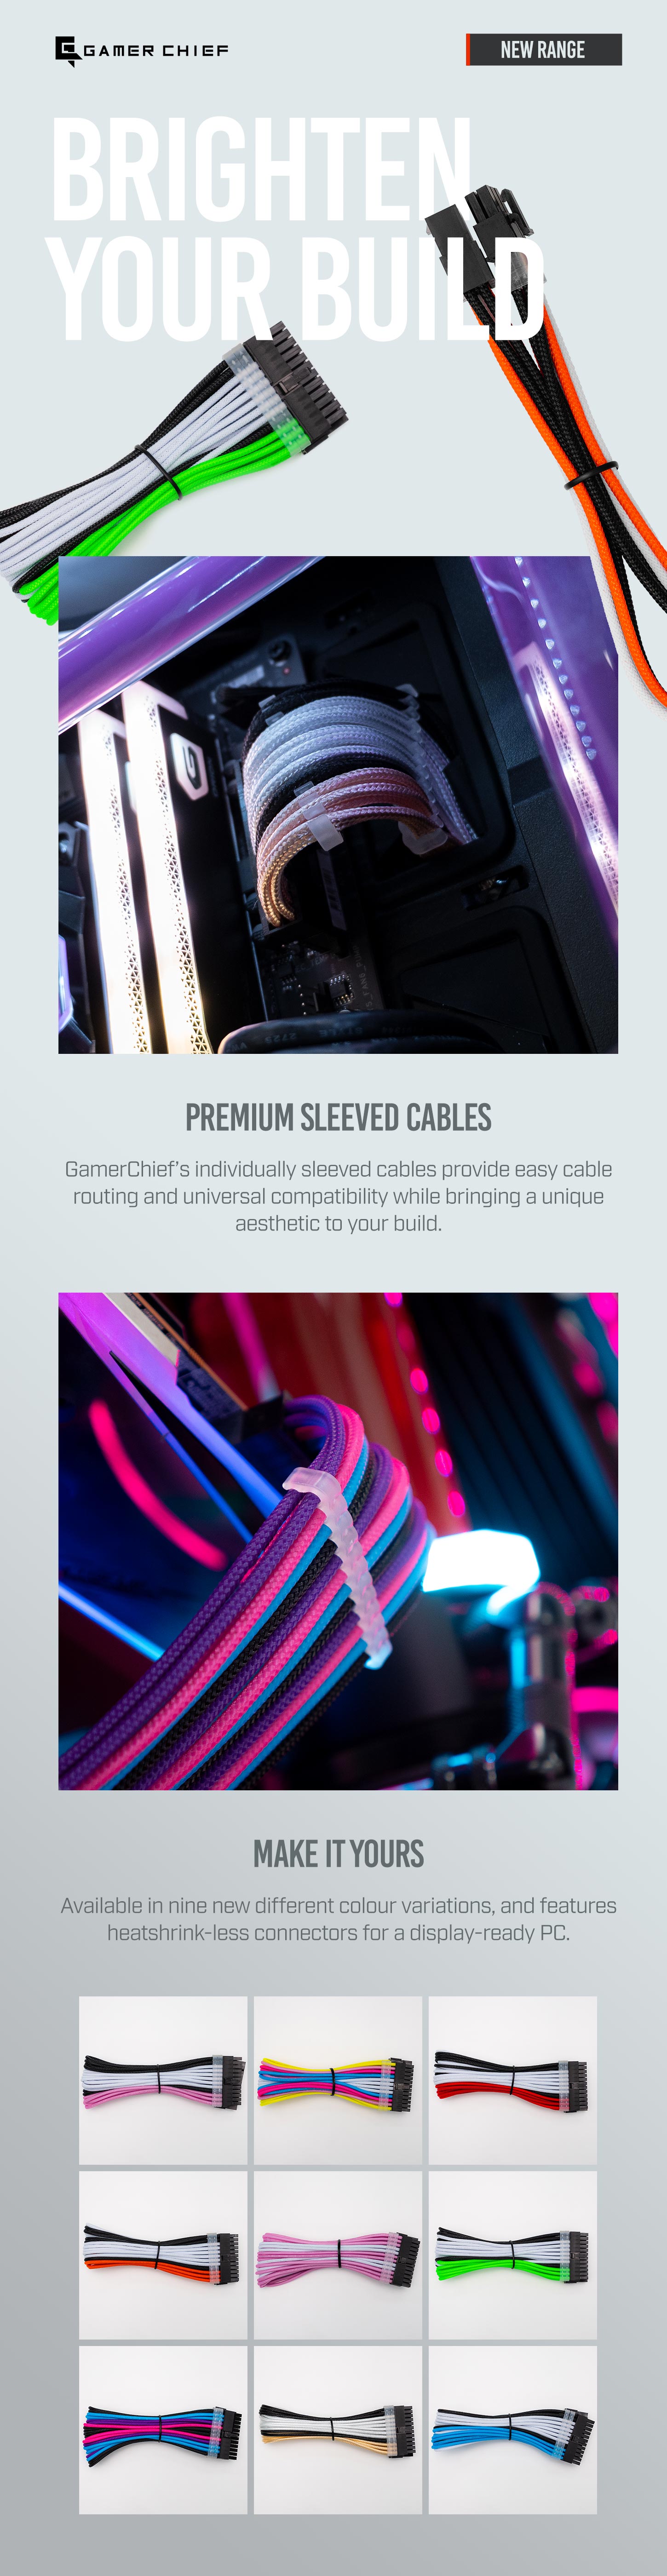 A large marketing image providing additional information about the product GamerChief Elite Series 8-Pin EPS 30cm Sleeved Extension Cable (Blue / Pink / Purple / Black) - Additional alt info not provided